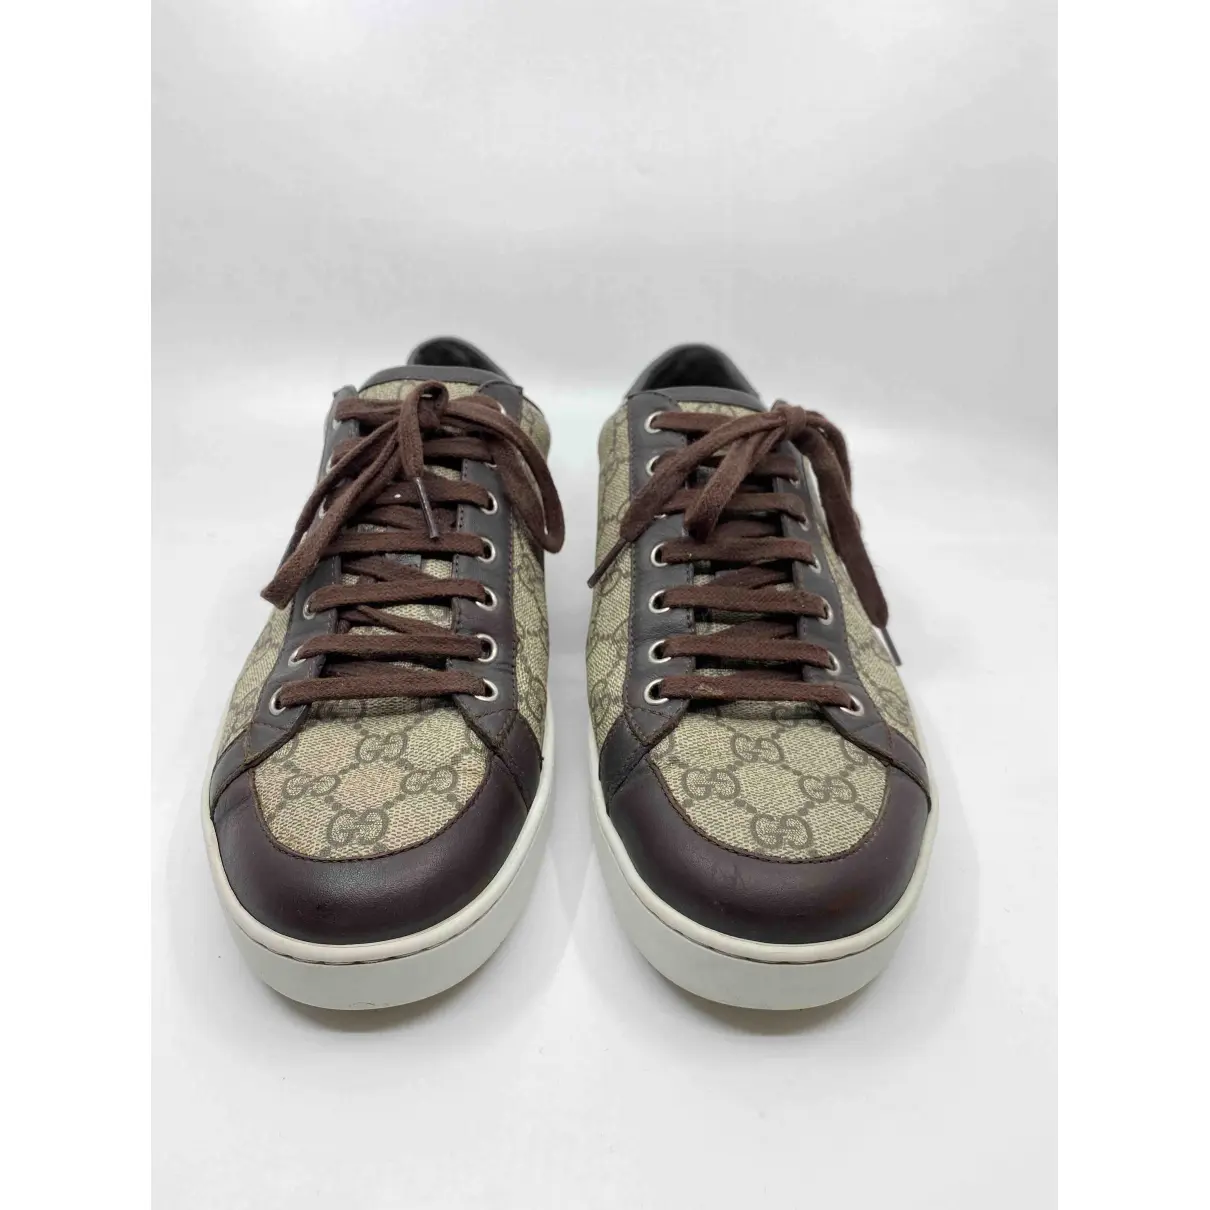 Buy Gucci Ace cloth trainers online